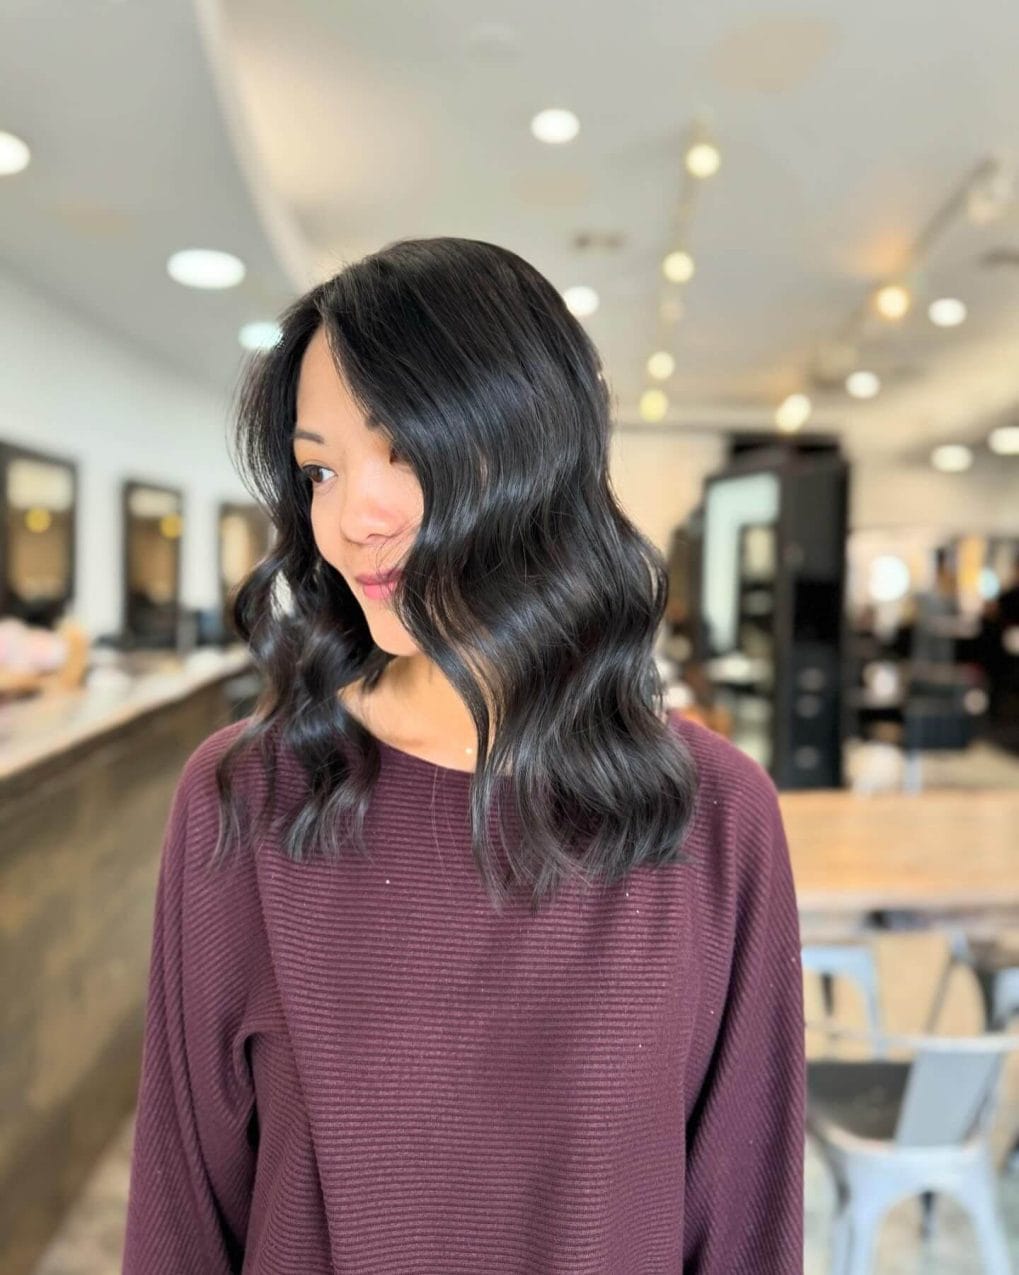 Shoulder-length with loose waves for bouncy volume